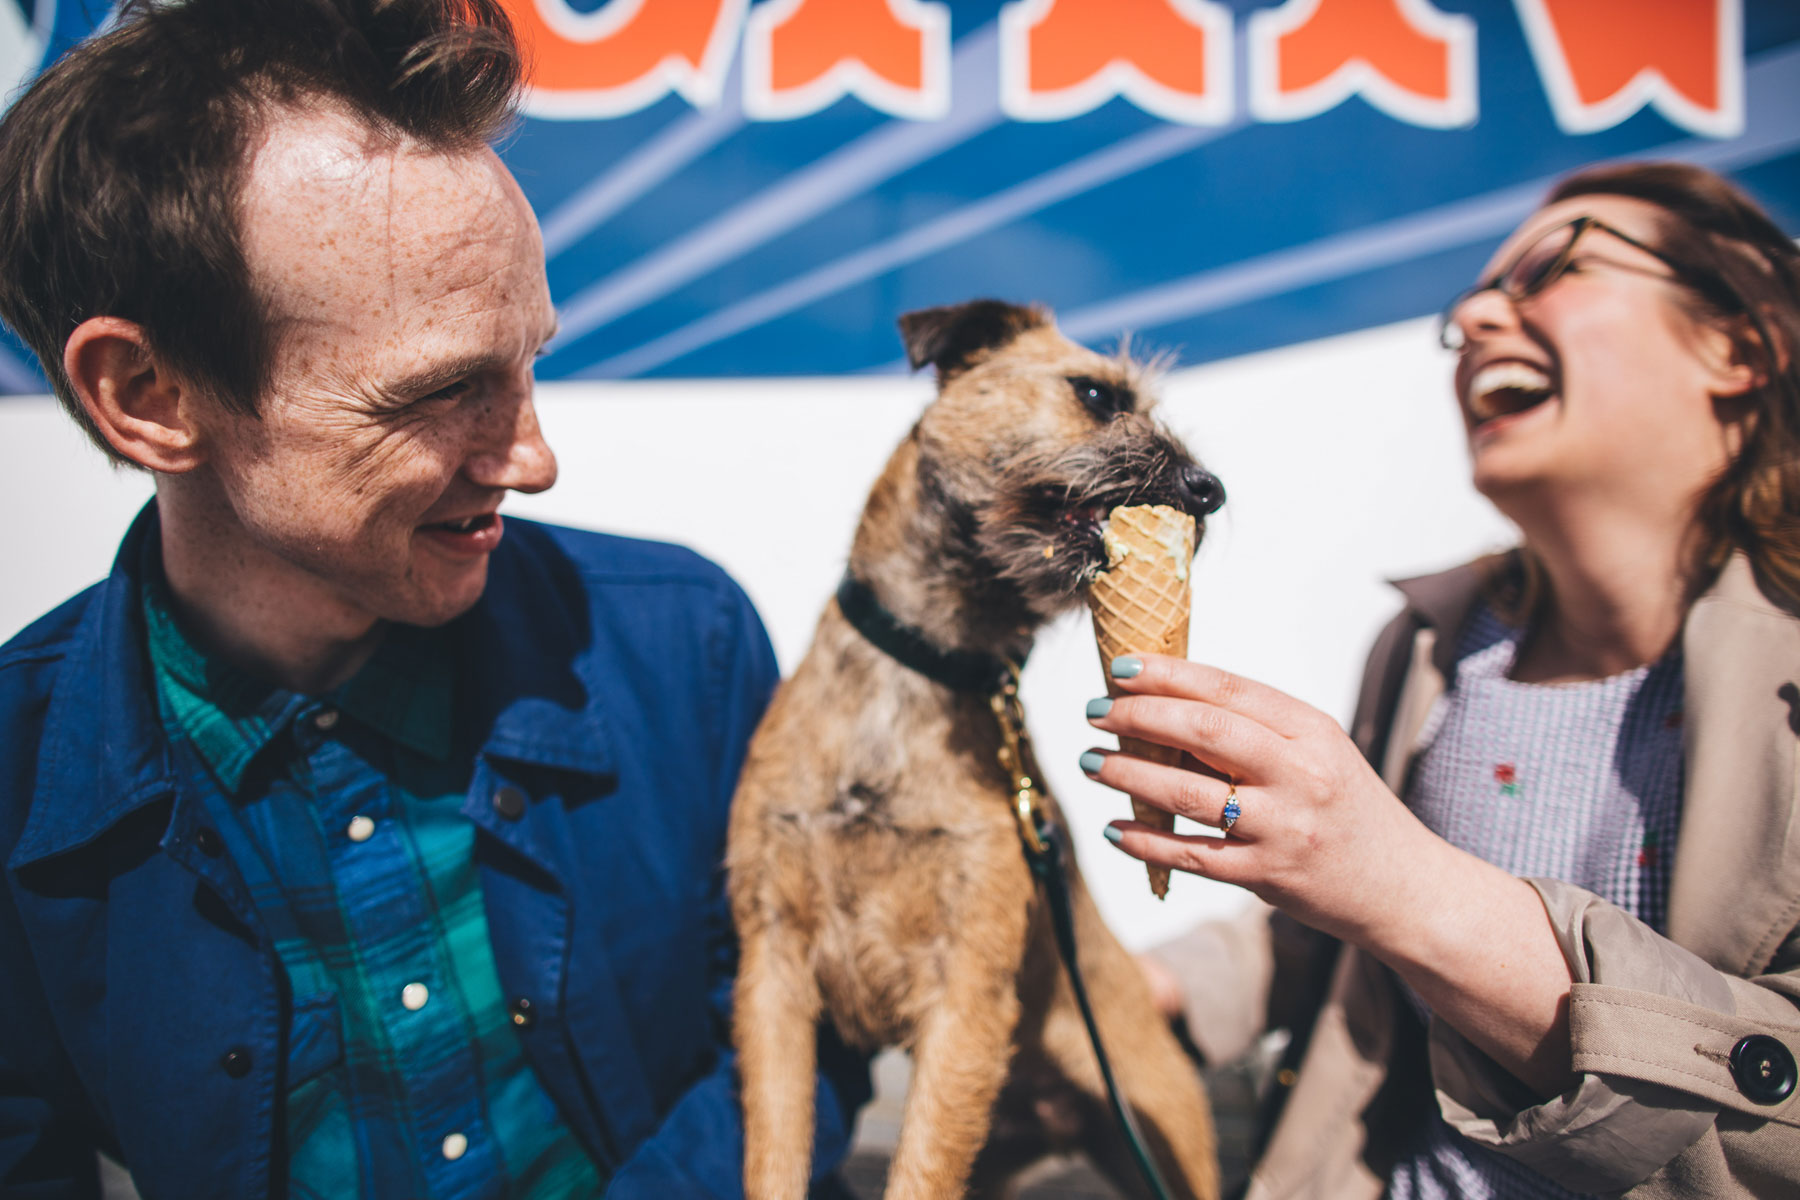 dog licks ice cream from a persons cone